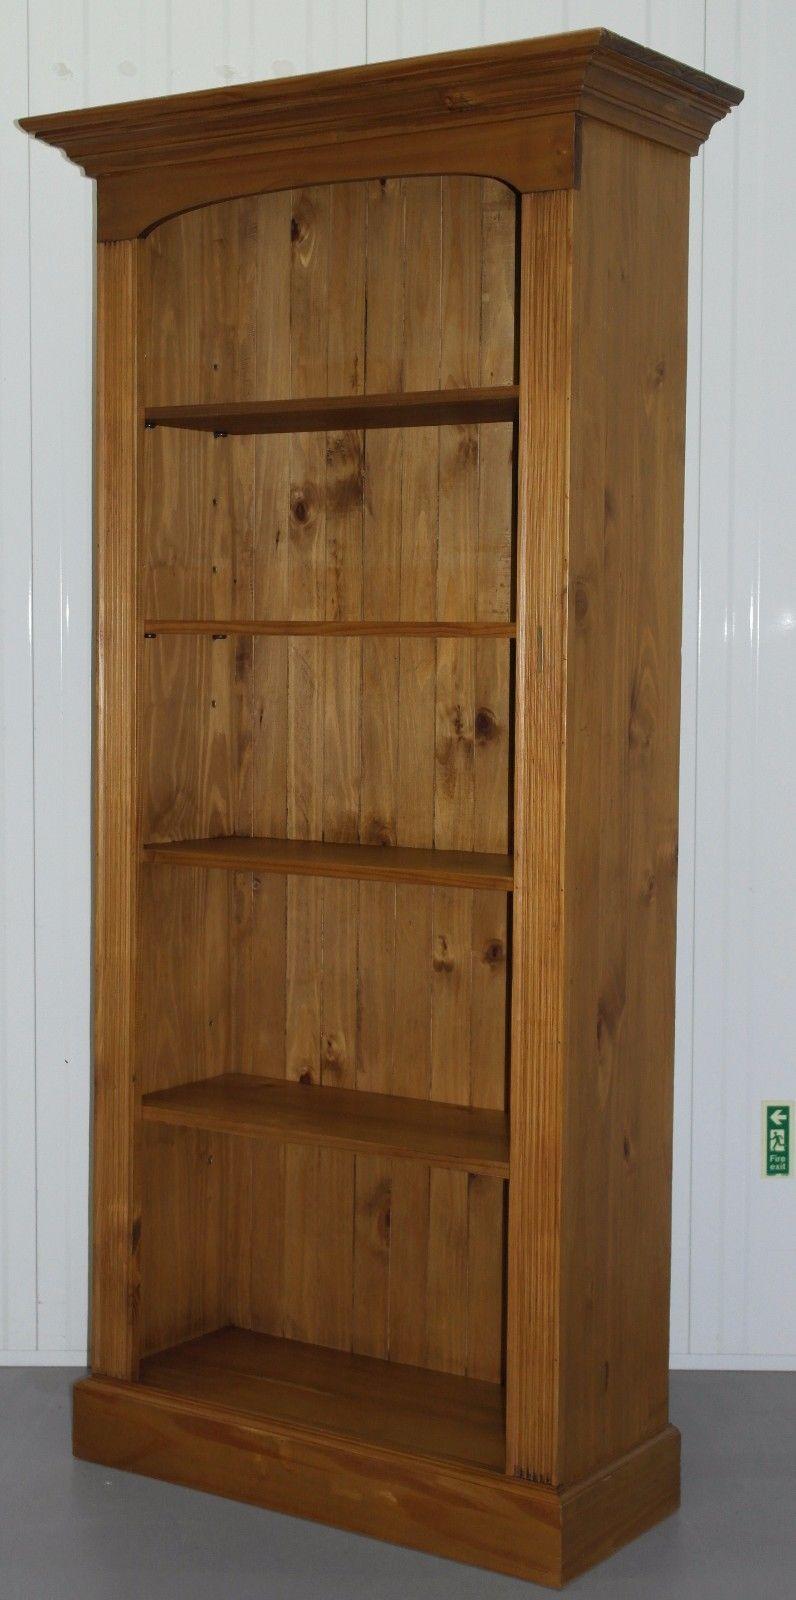 We are delighted to offer for sale this lovely solid pine farmhouse country bookcase

A fantastic piece and rare to find in such lightly used condition, we have deep cleaned hand condition waxed and hand polished it from top to